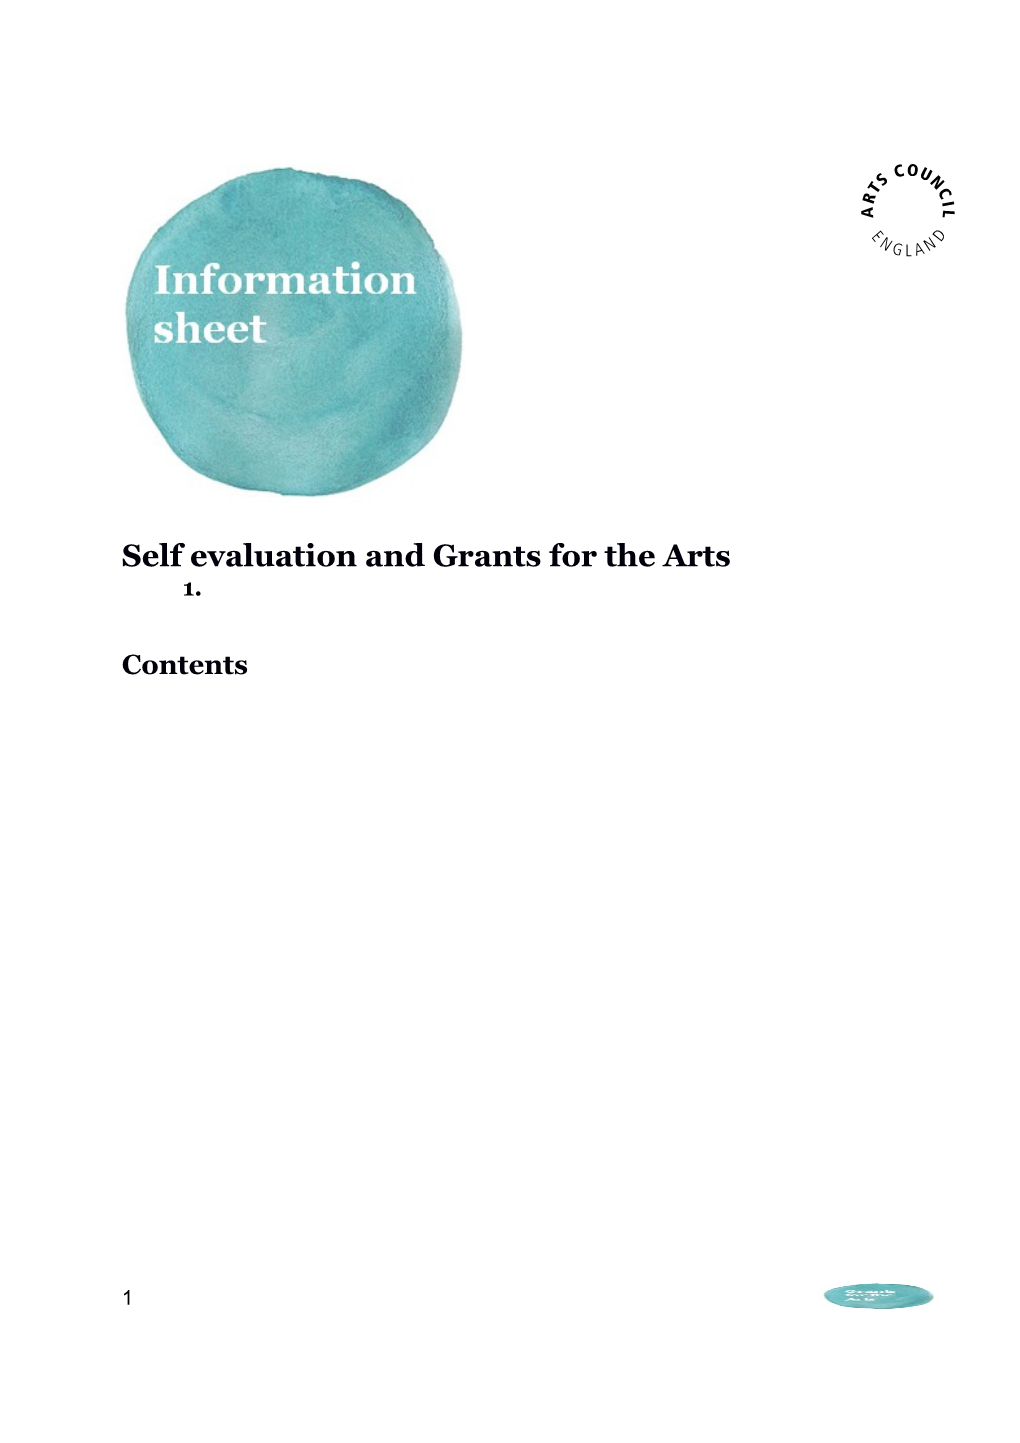 Self Evaluation and Grants for the Arts